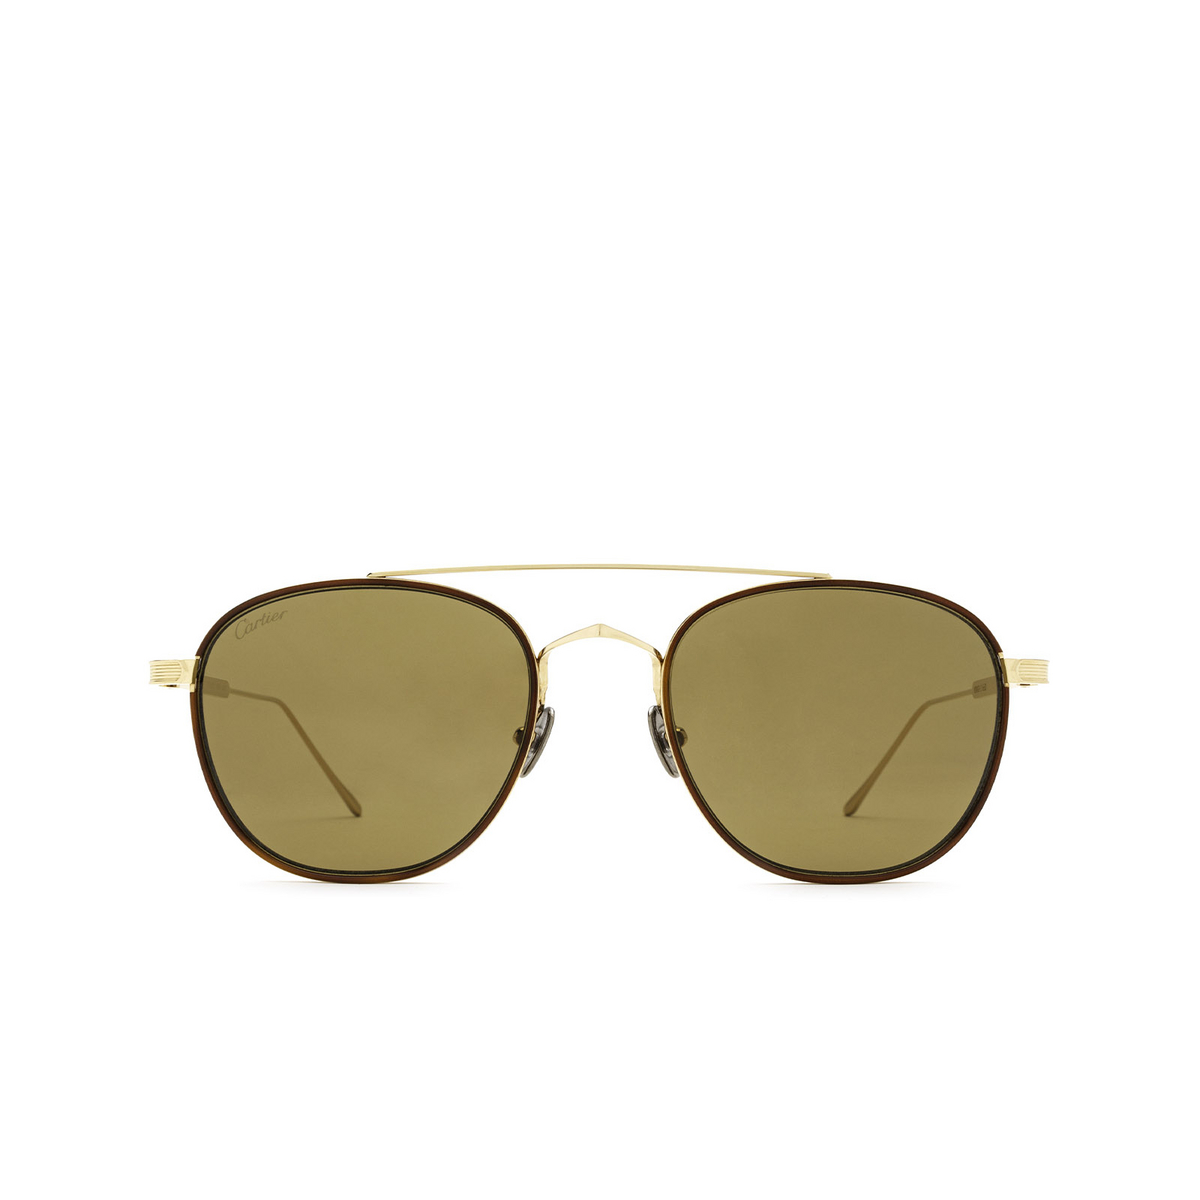 Cartier® Square Sunglasses: CT0251S color Gold 008 - front view.